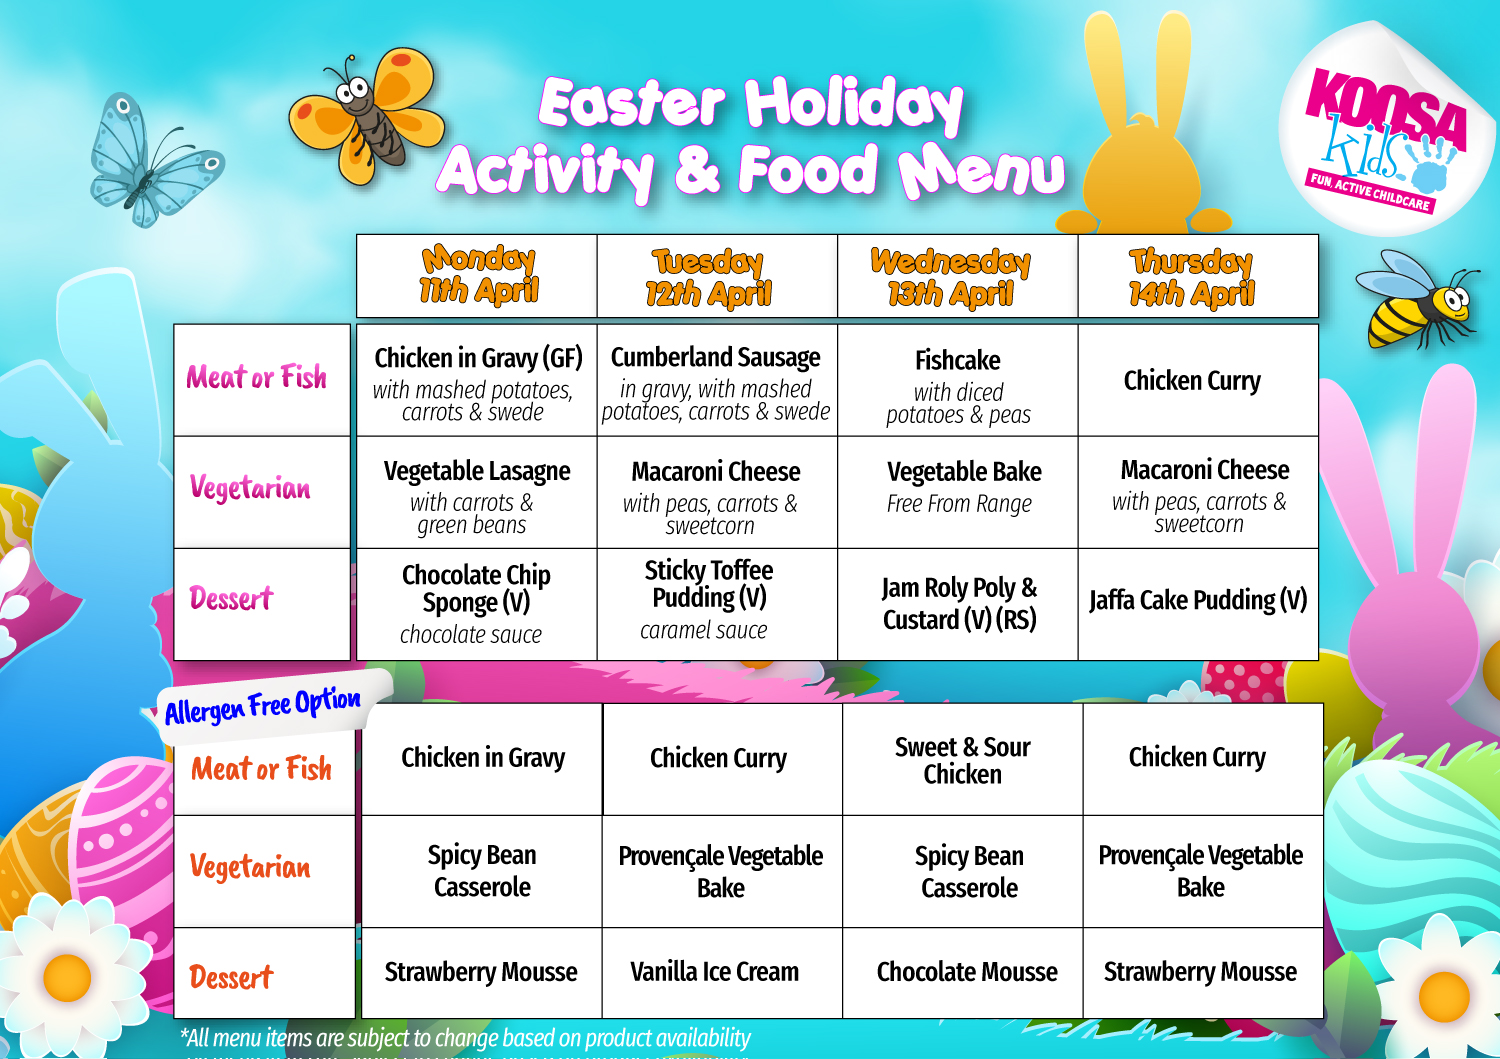 https://www.koosakids.co.uk/koosa-kids-holiday-activities-and-food-sessions-in-hampshire